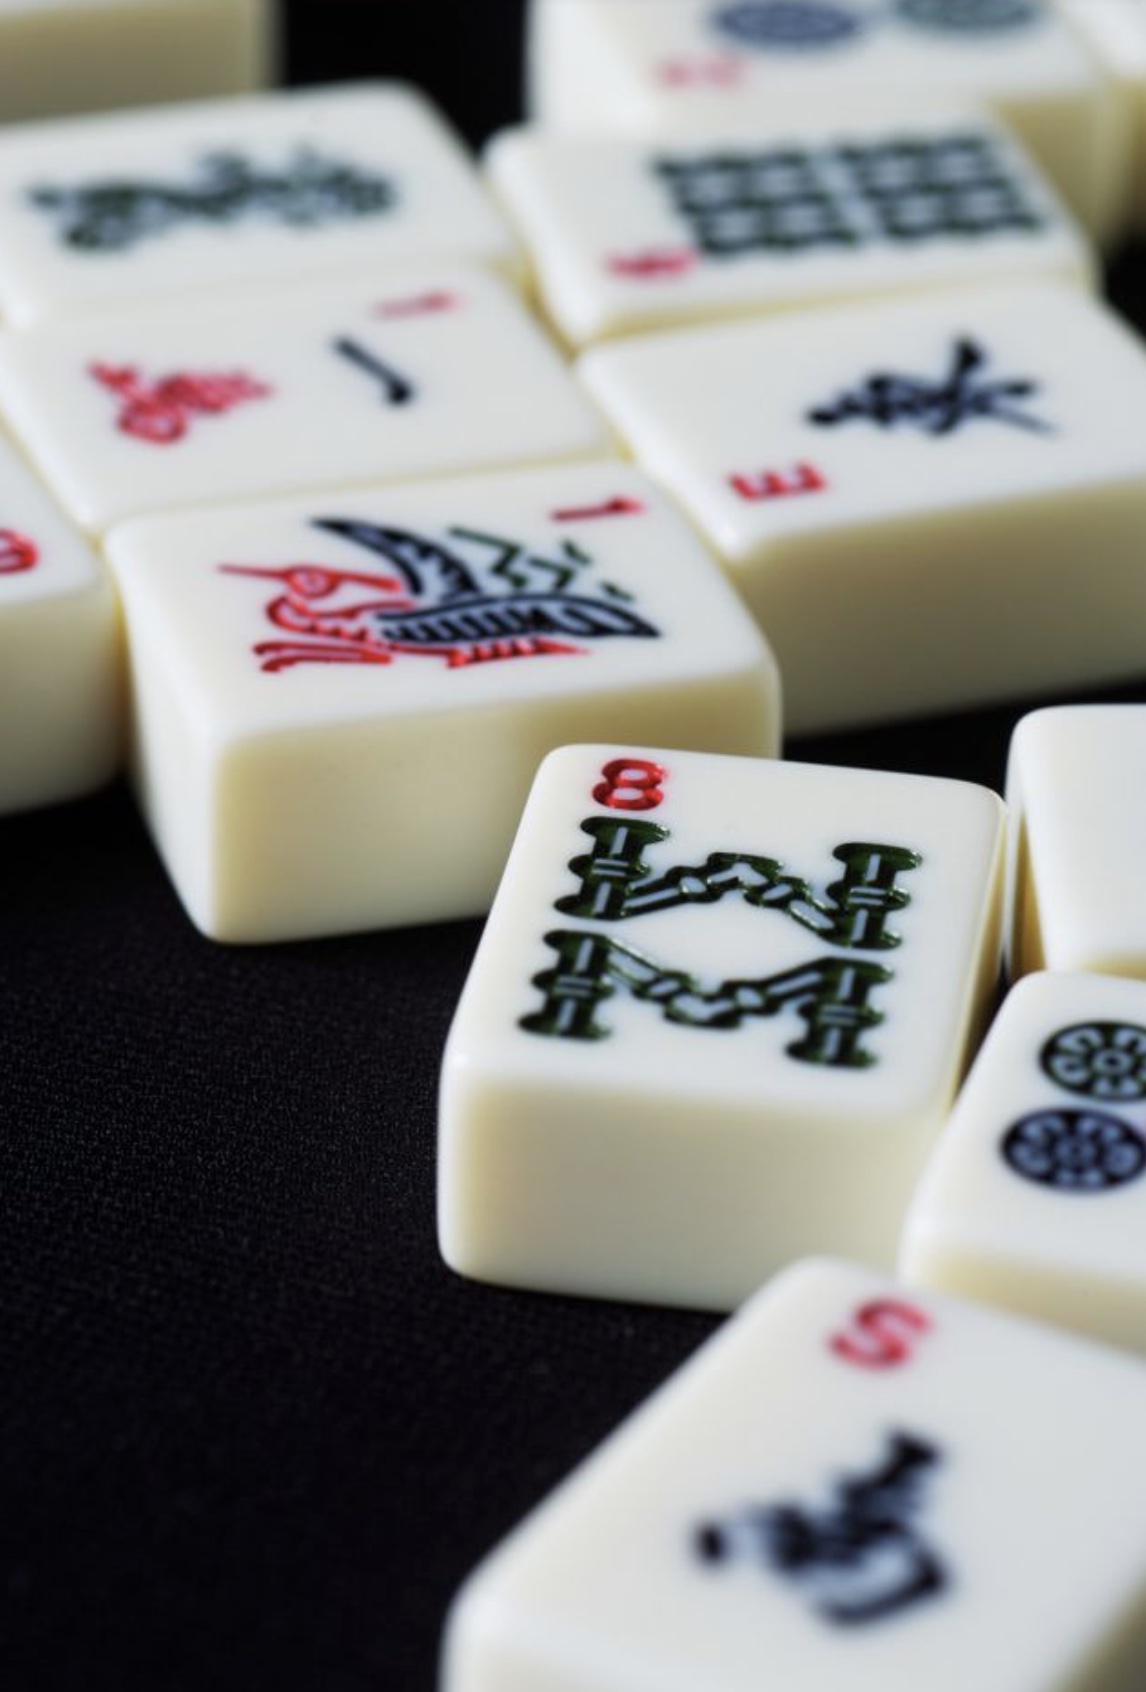 Trending Now: A Brief History of Mahjong